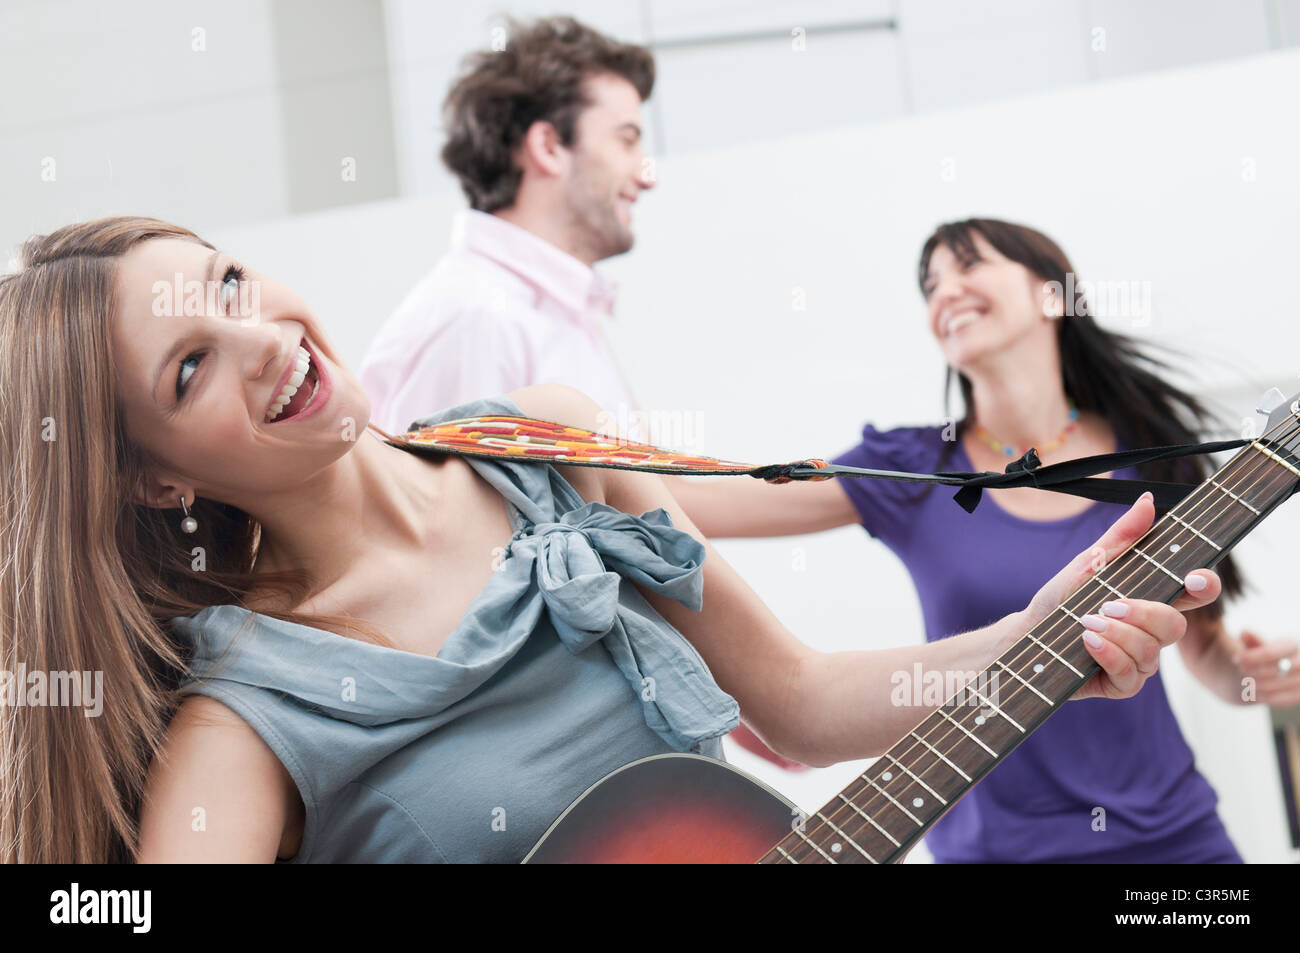 Singing and playing guitar Stock Photo